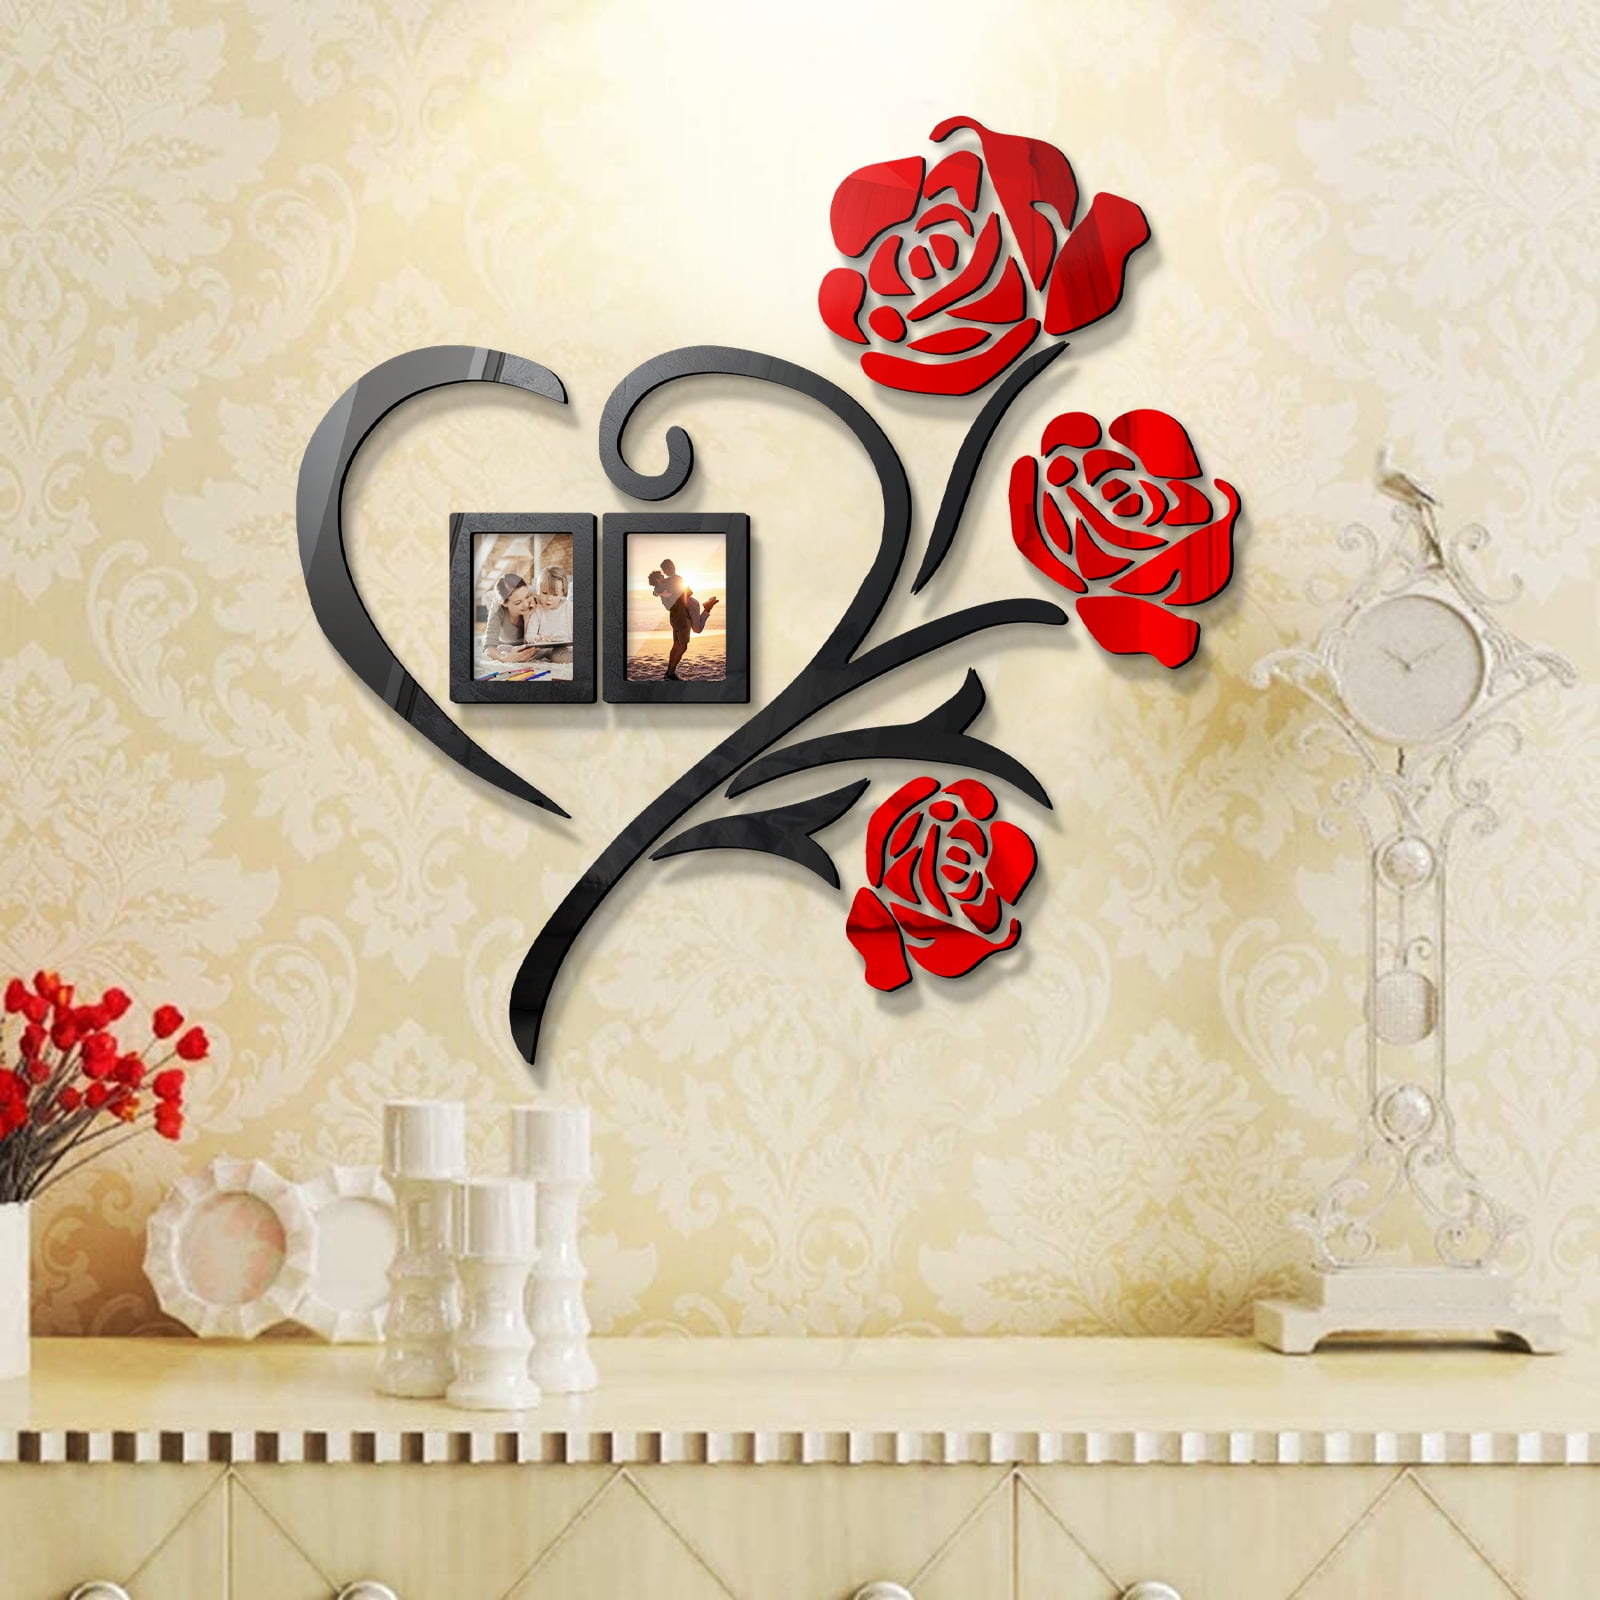 Family Love Rose Wall Decals 3D DIY Photo Frame Wall Stickers Mural Home Decor 